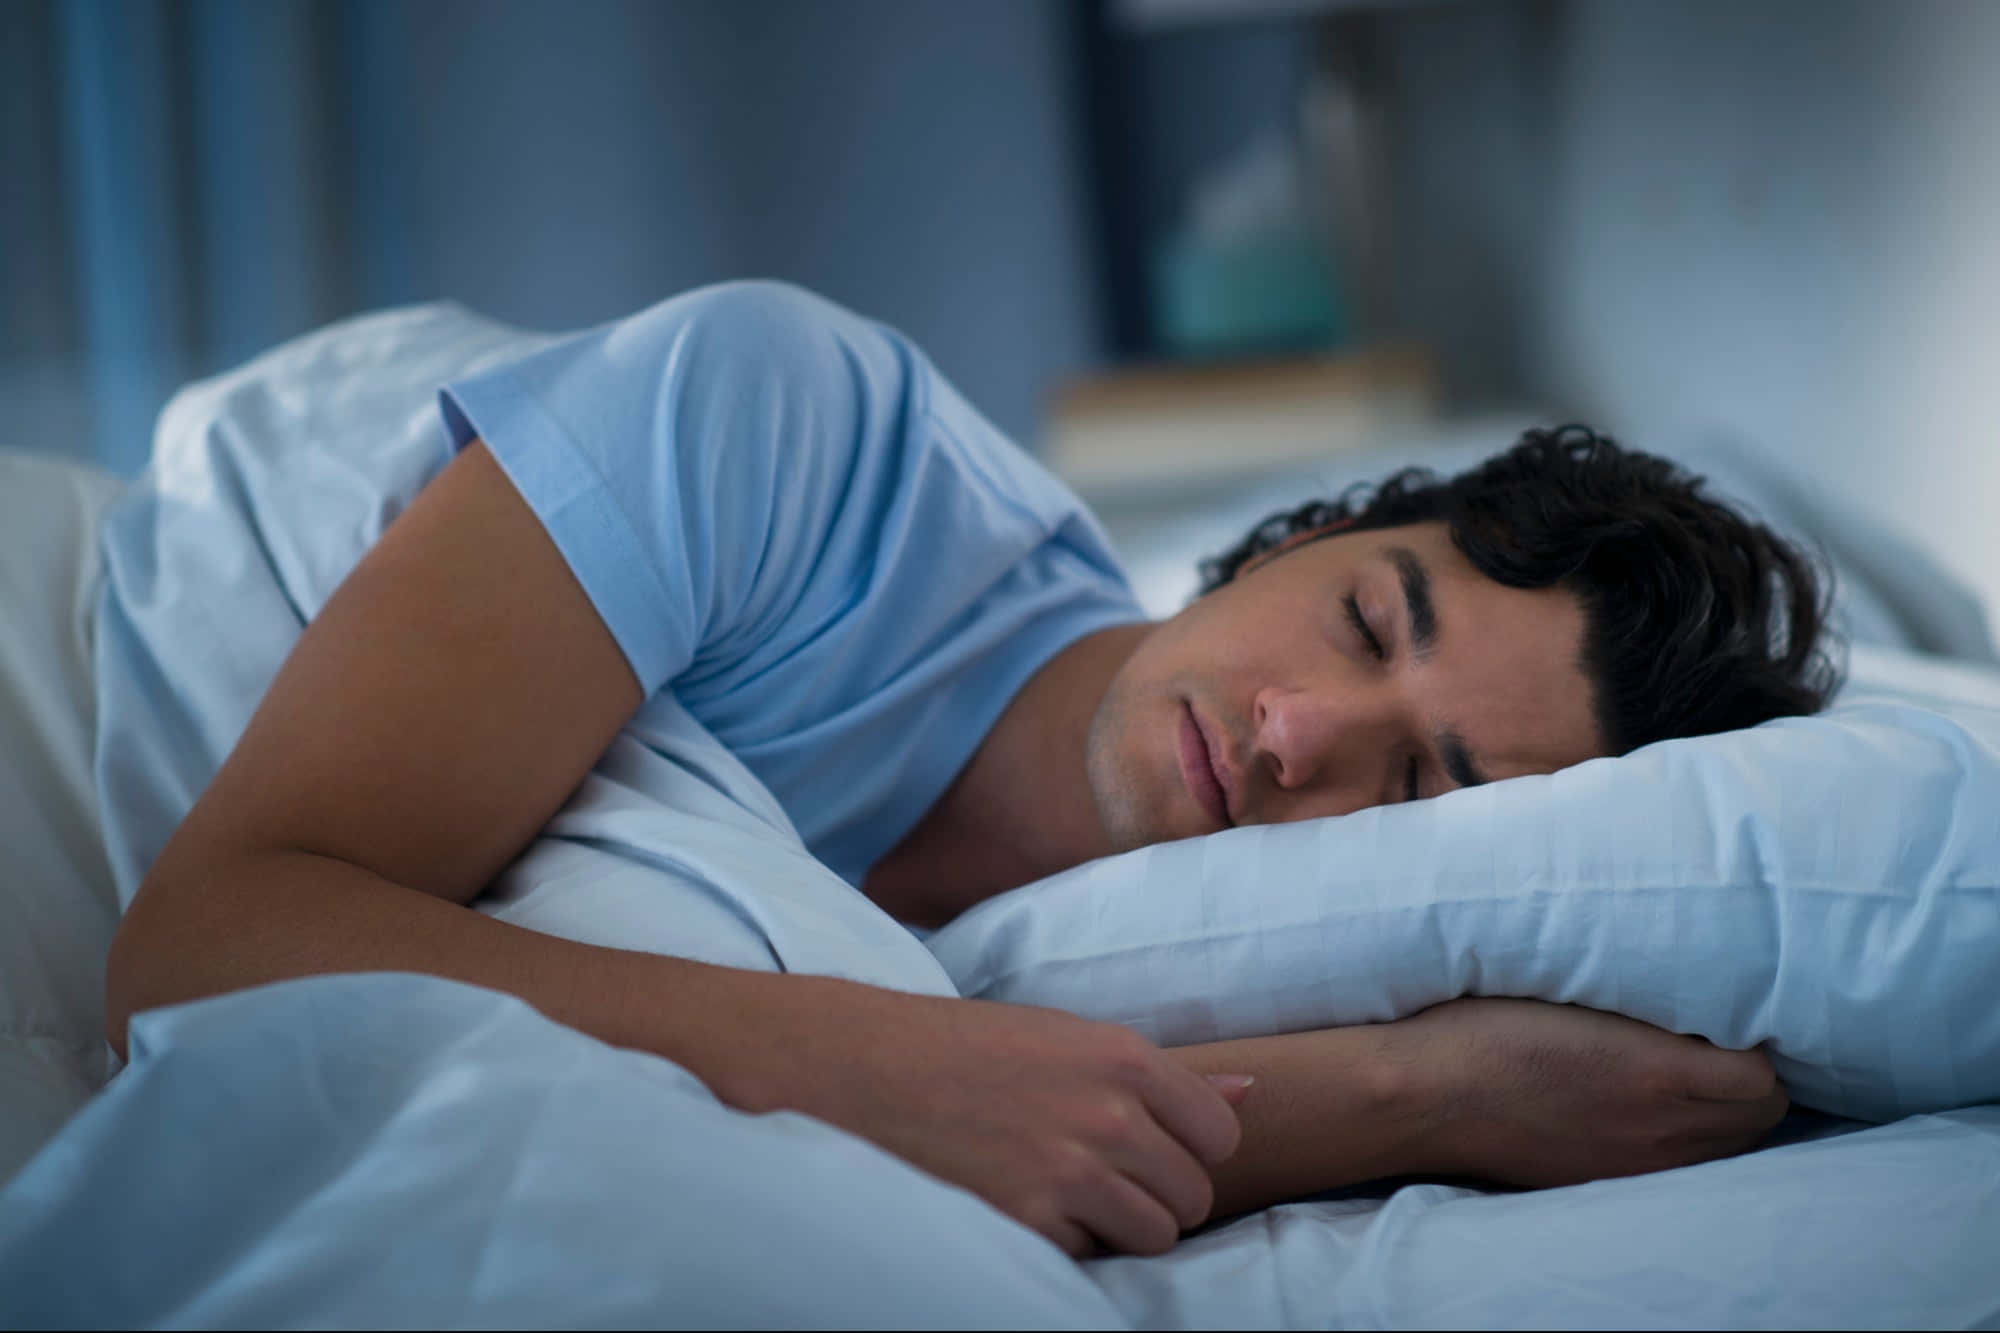 Getting a satisfying sleep each night helps keep your body and mind healthy